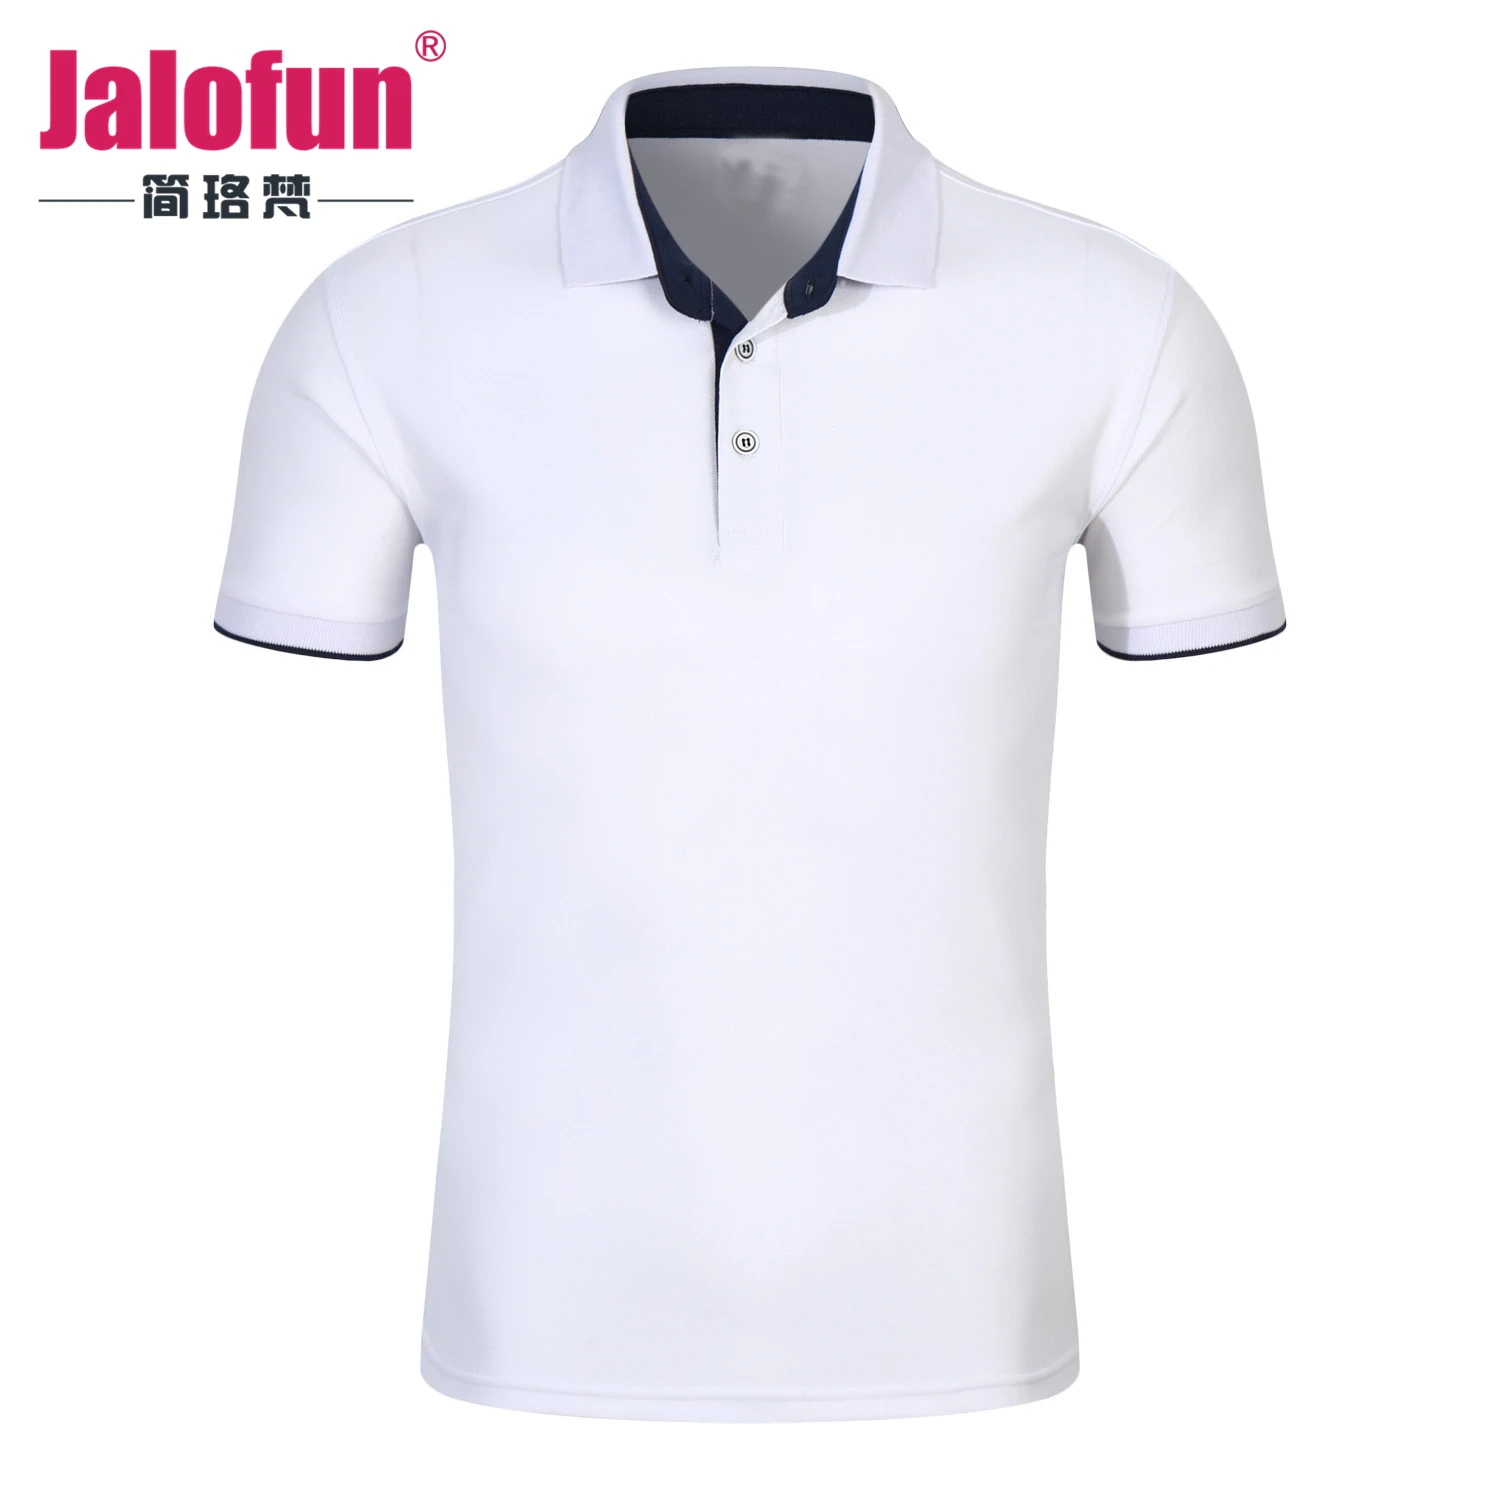 Wholesale Sports Embroidered Polo Shirts Made In China - Buy Polo ...